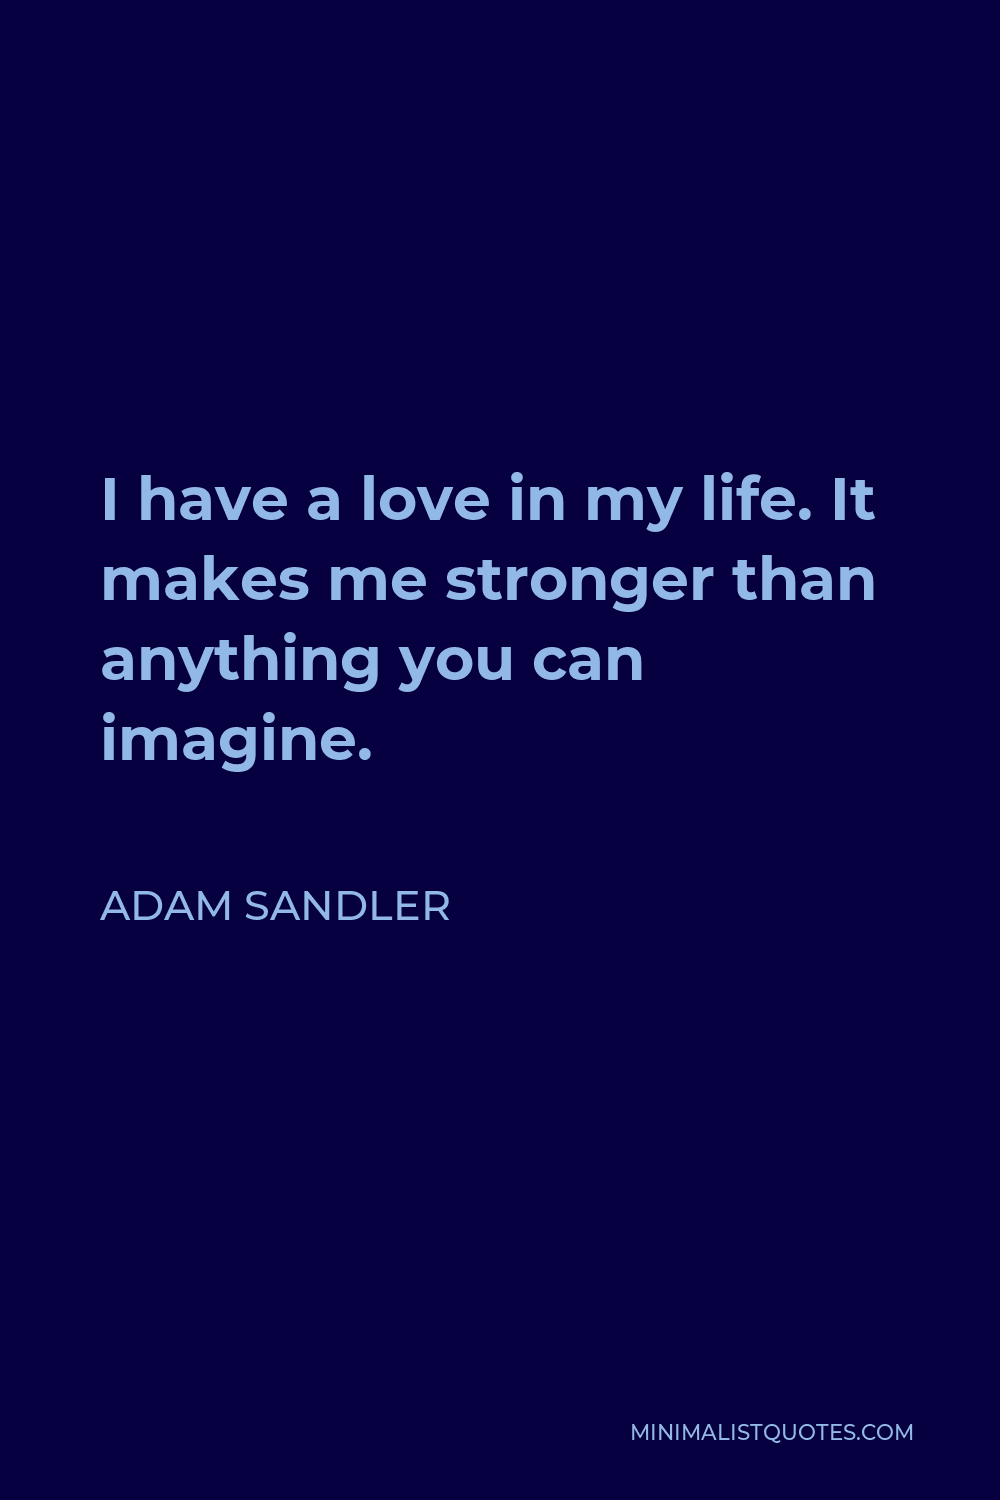 Adam Sandler Quote - I have a love in my life. It makes me stronger than anything you can imagine.